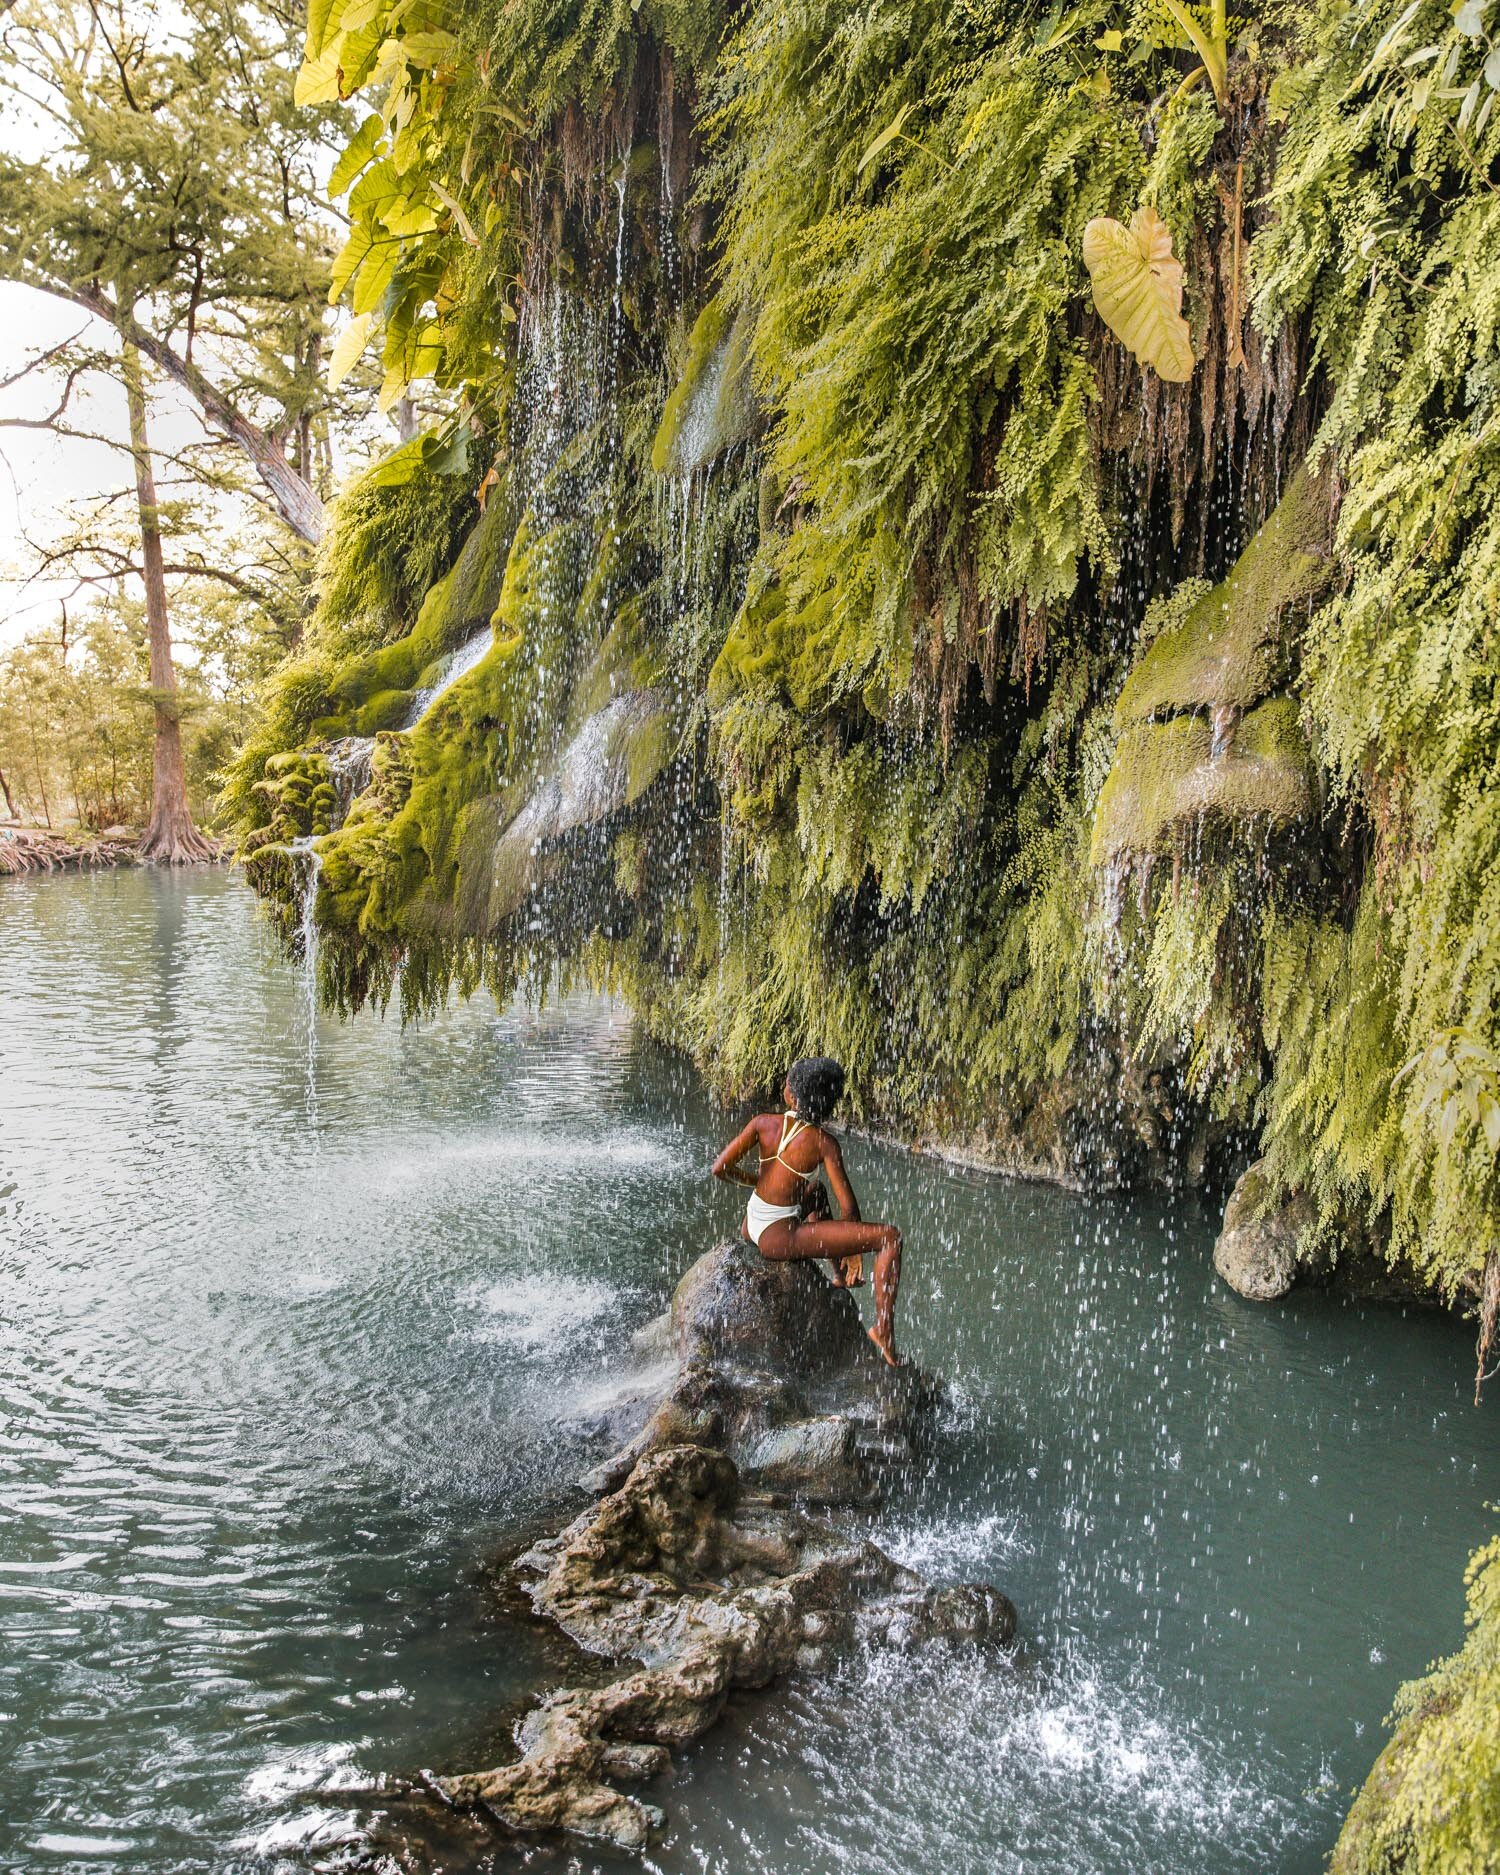 Krause Springs: One of the Best Swimming Holes in Texas // Krause Springs is a natural swimming hole just outside of Austin in Spicewood, Texas. It's beautiful waterfall and cool temperatures make it one of the best swimming spots in the Texas Hill …